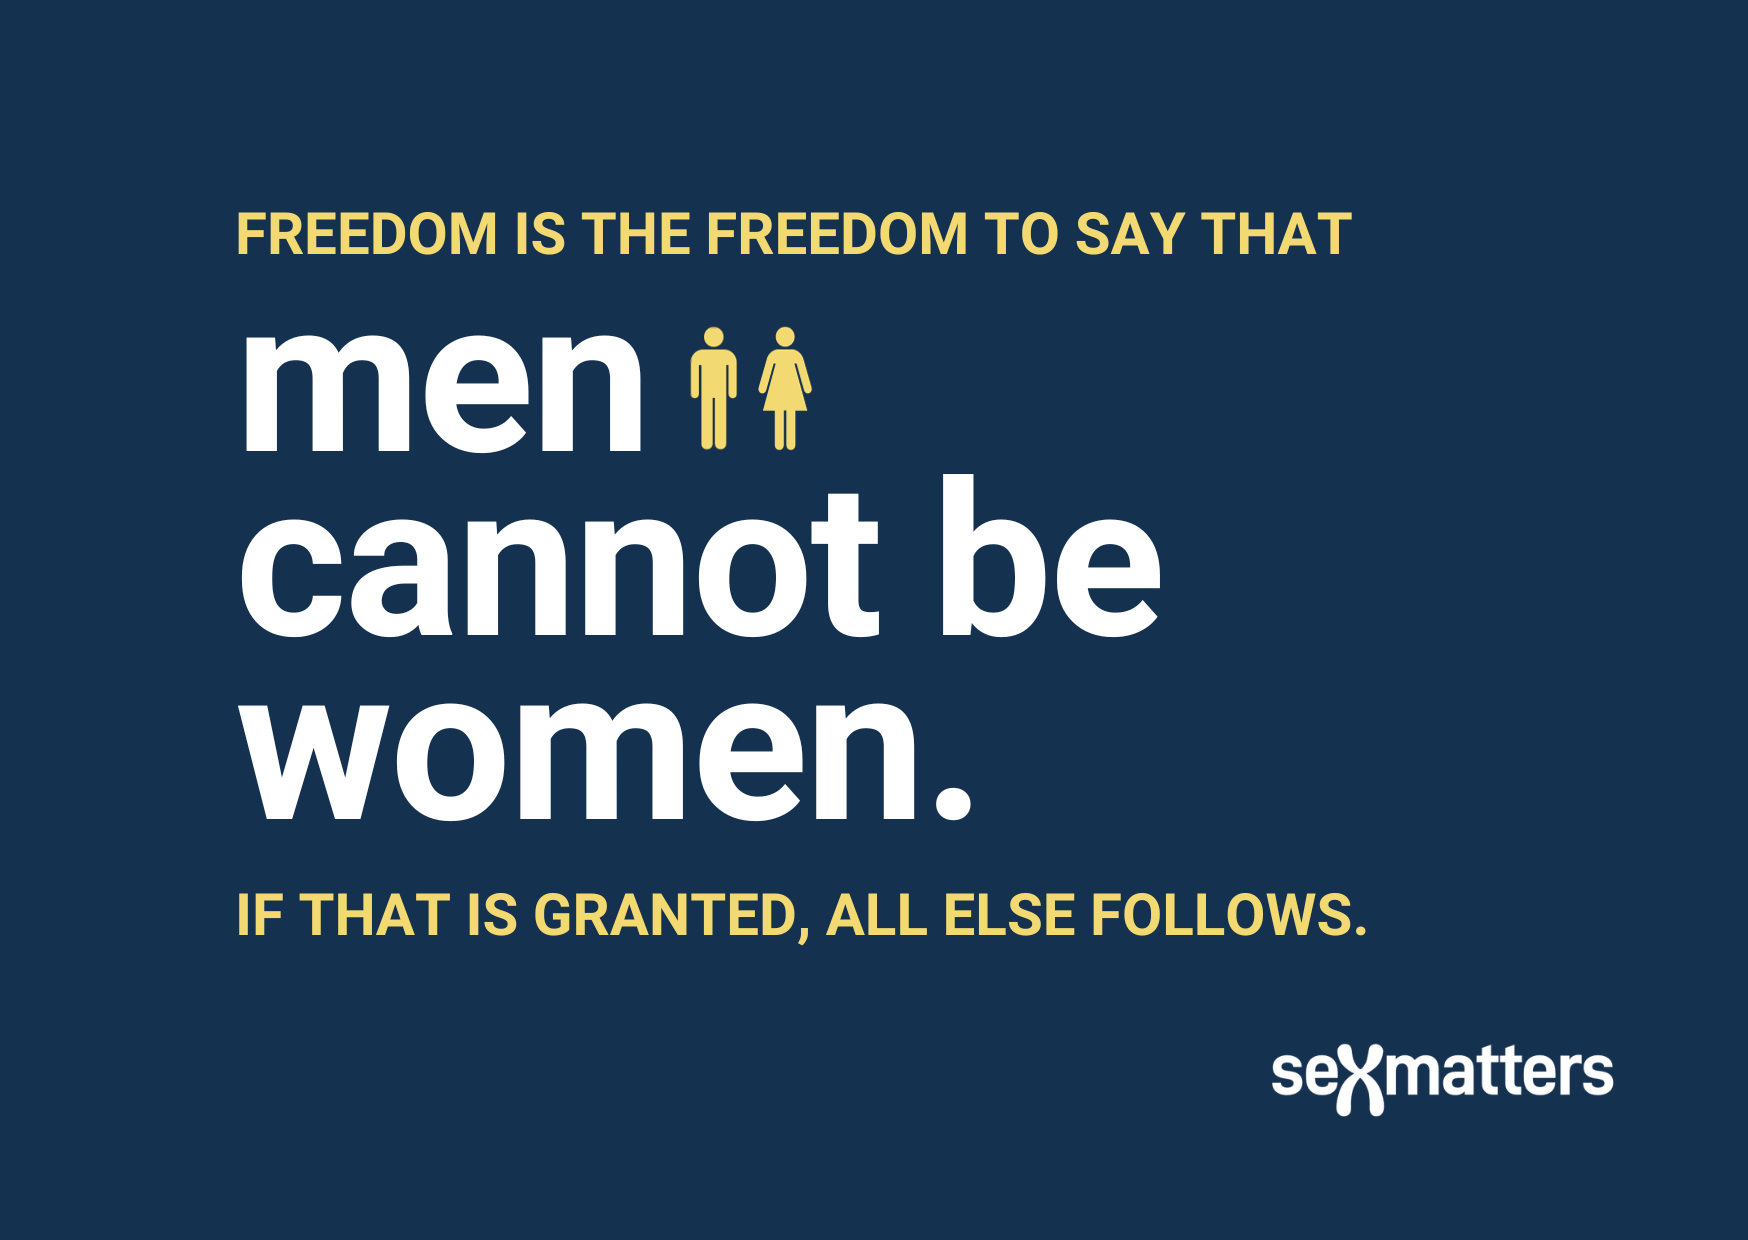 Freedom is the freedom to say that men cannot be women. If that is granted, all else follows.